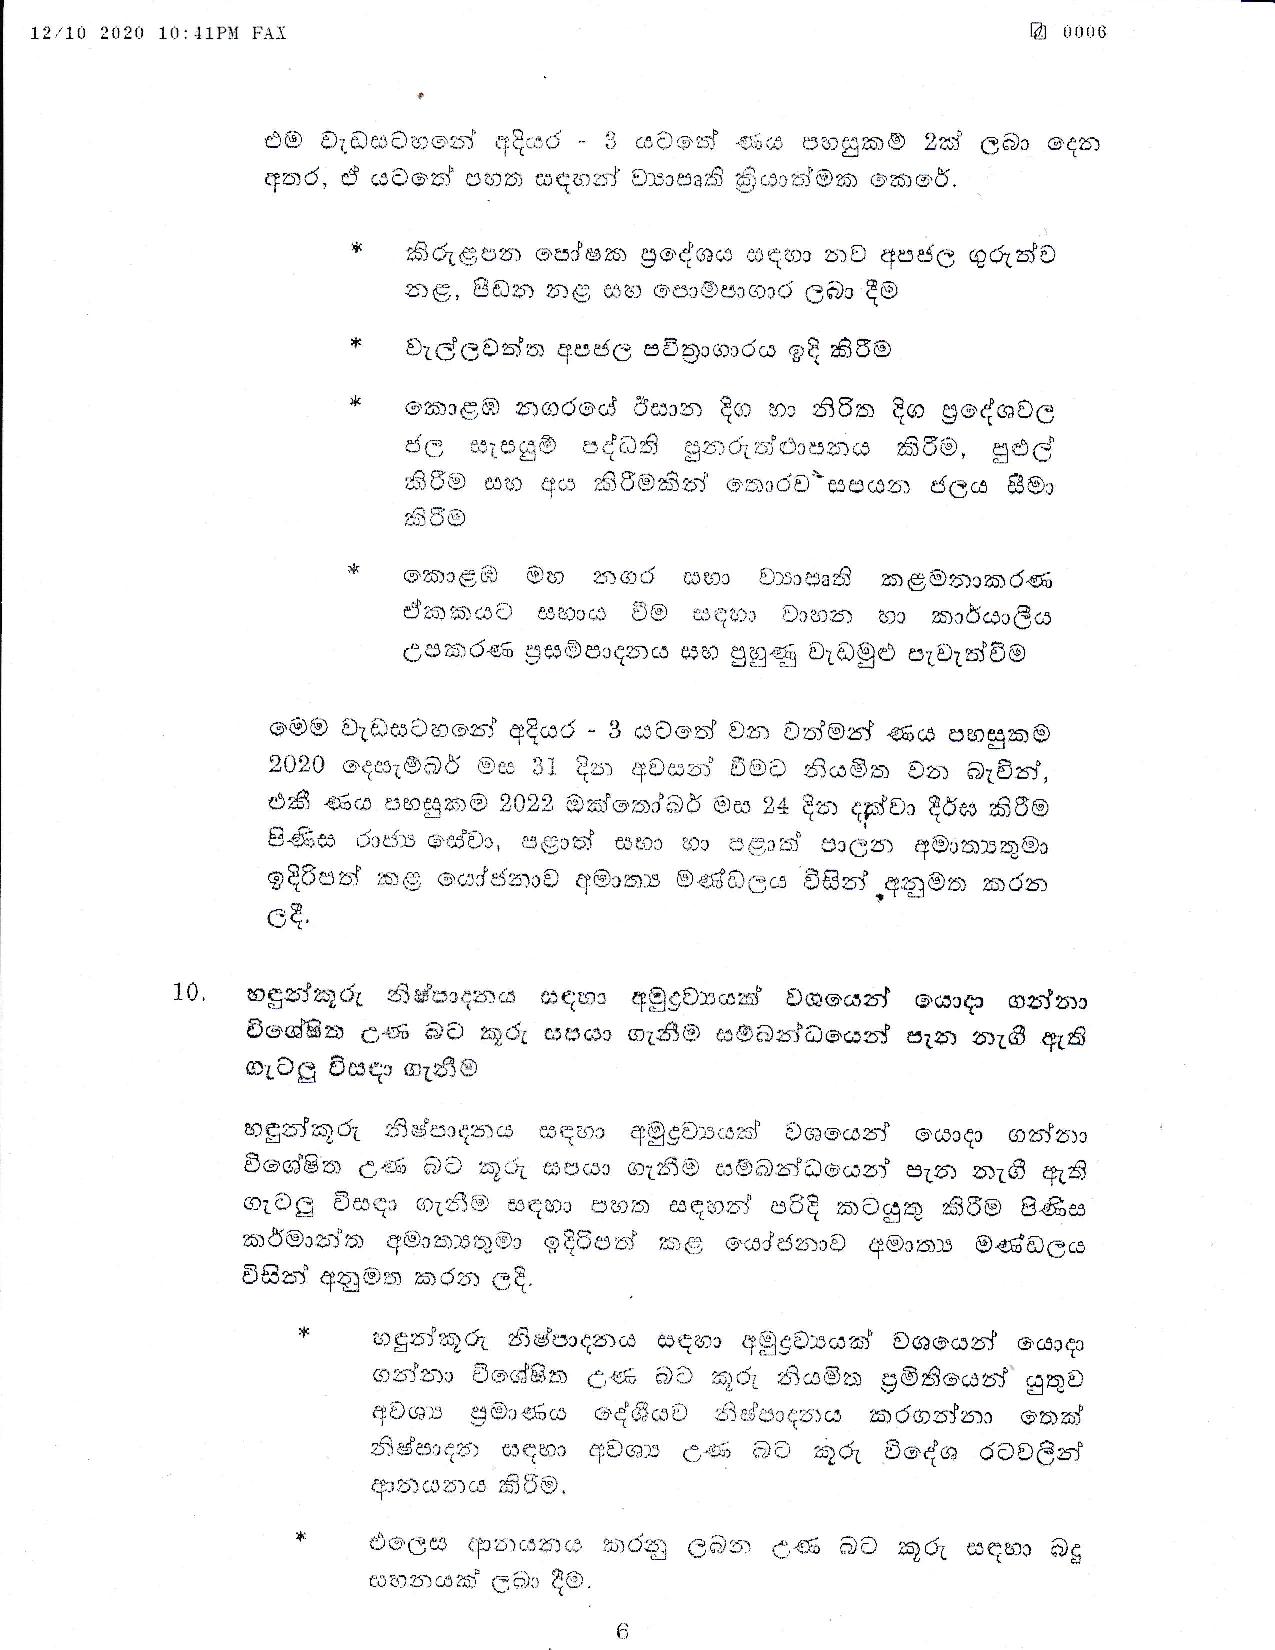 Cabinet Decision on 12.10.2020 page 006